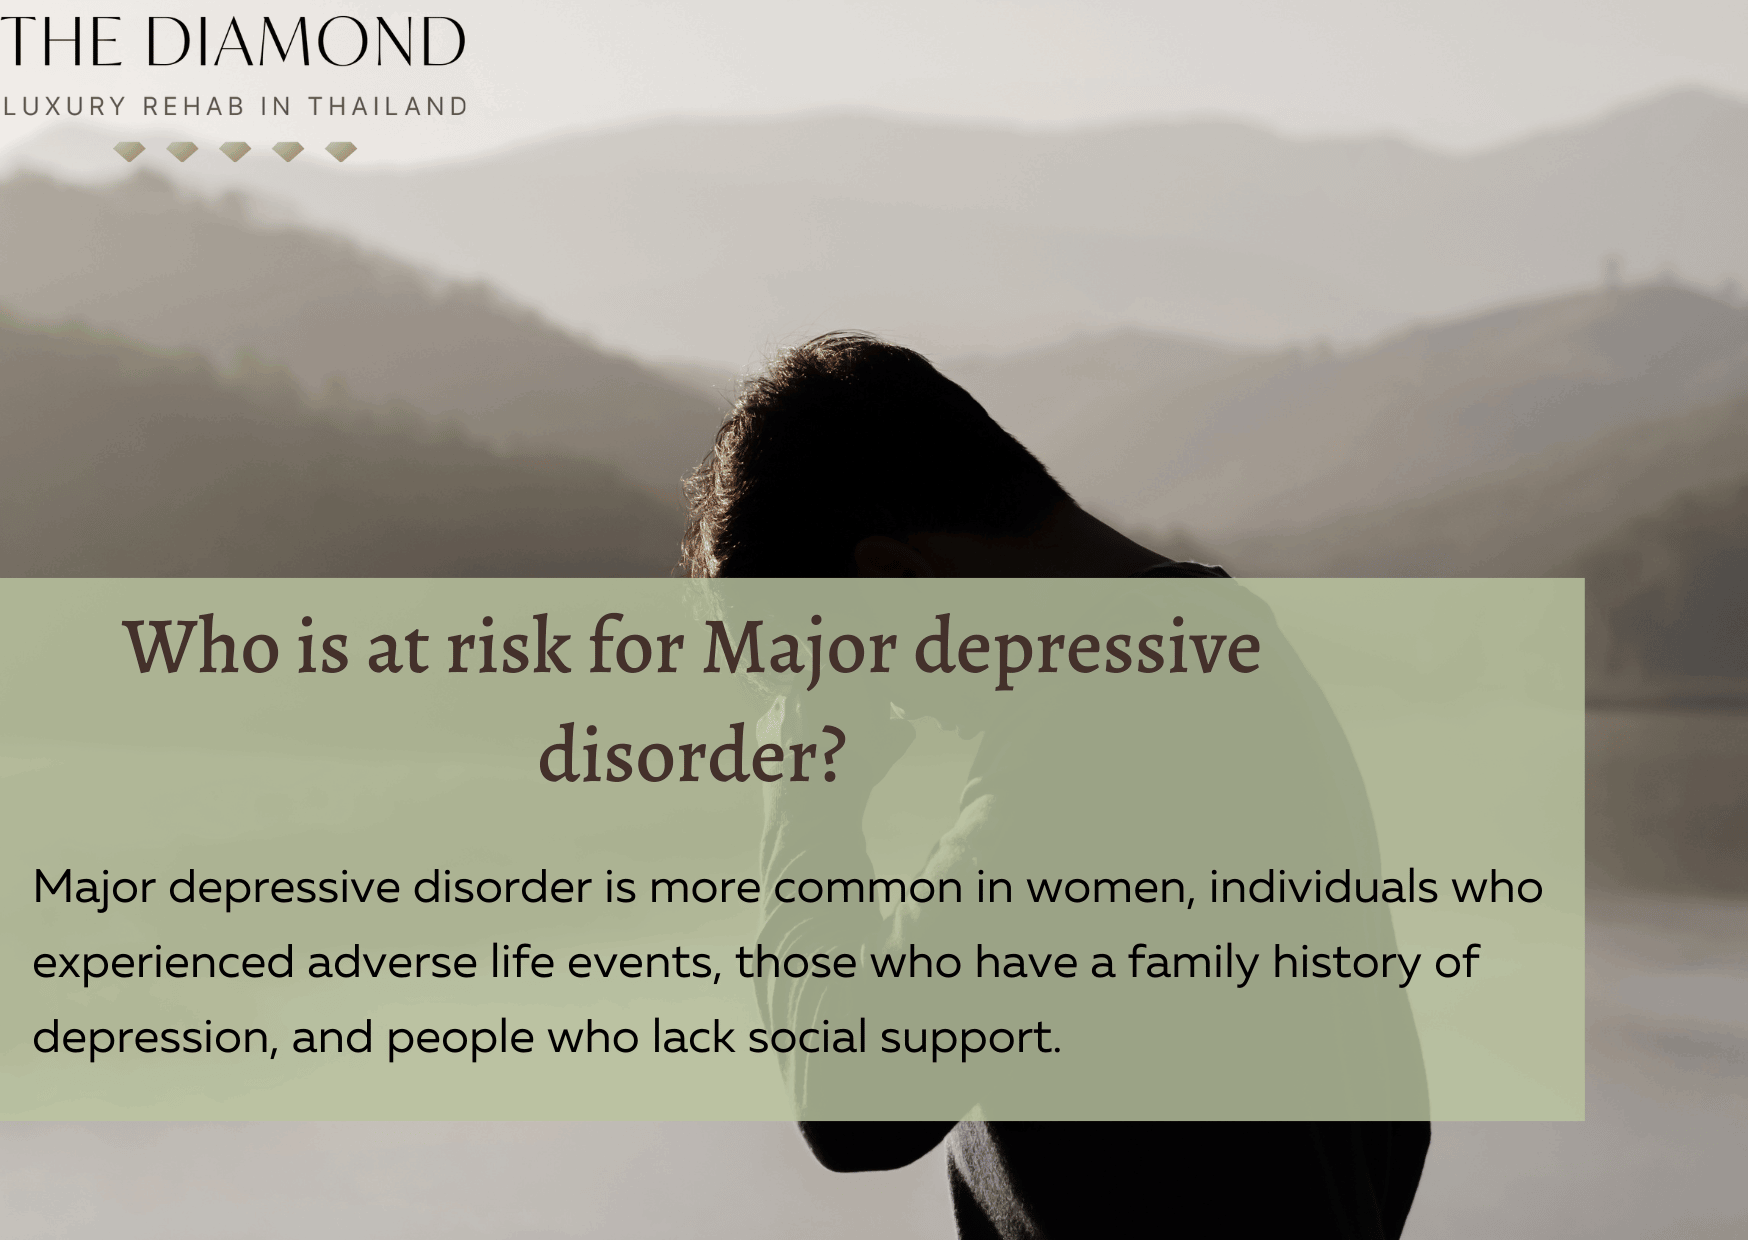 Who is at risk for Major depressive disorder